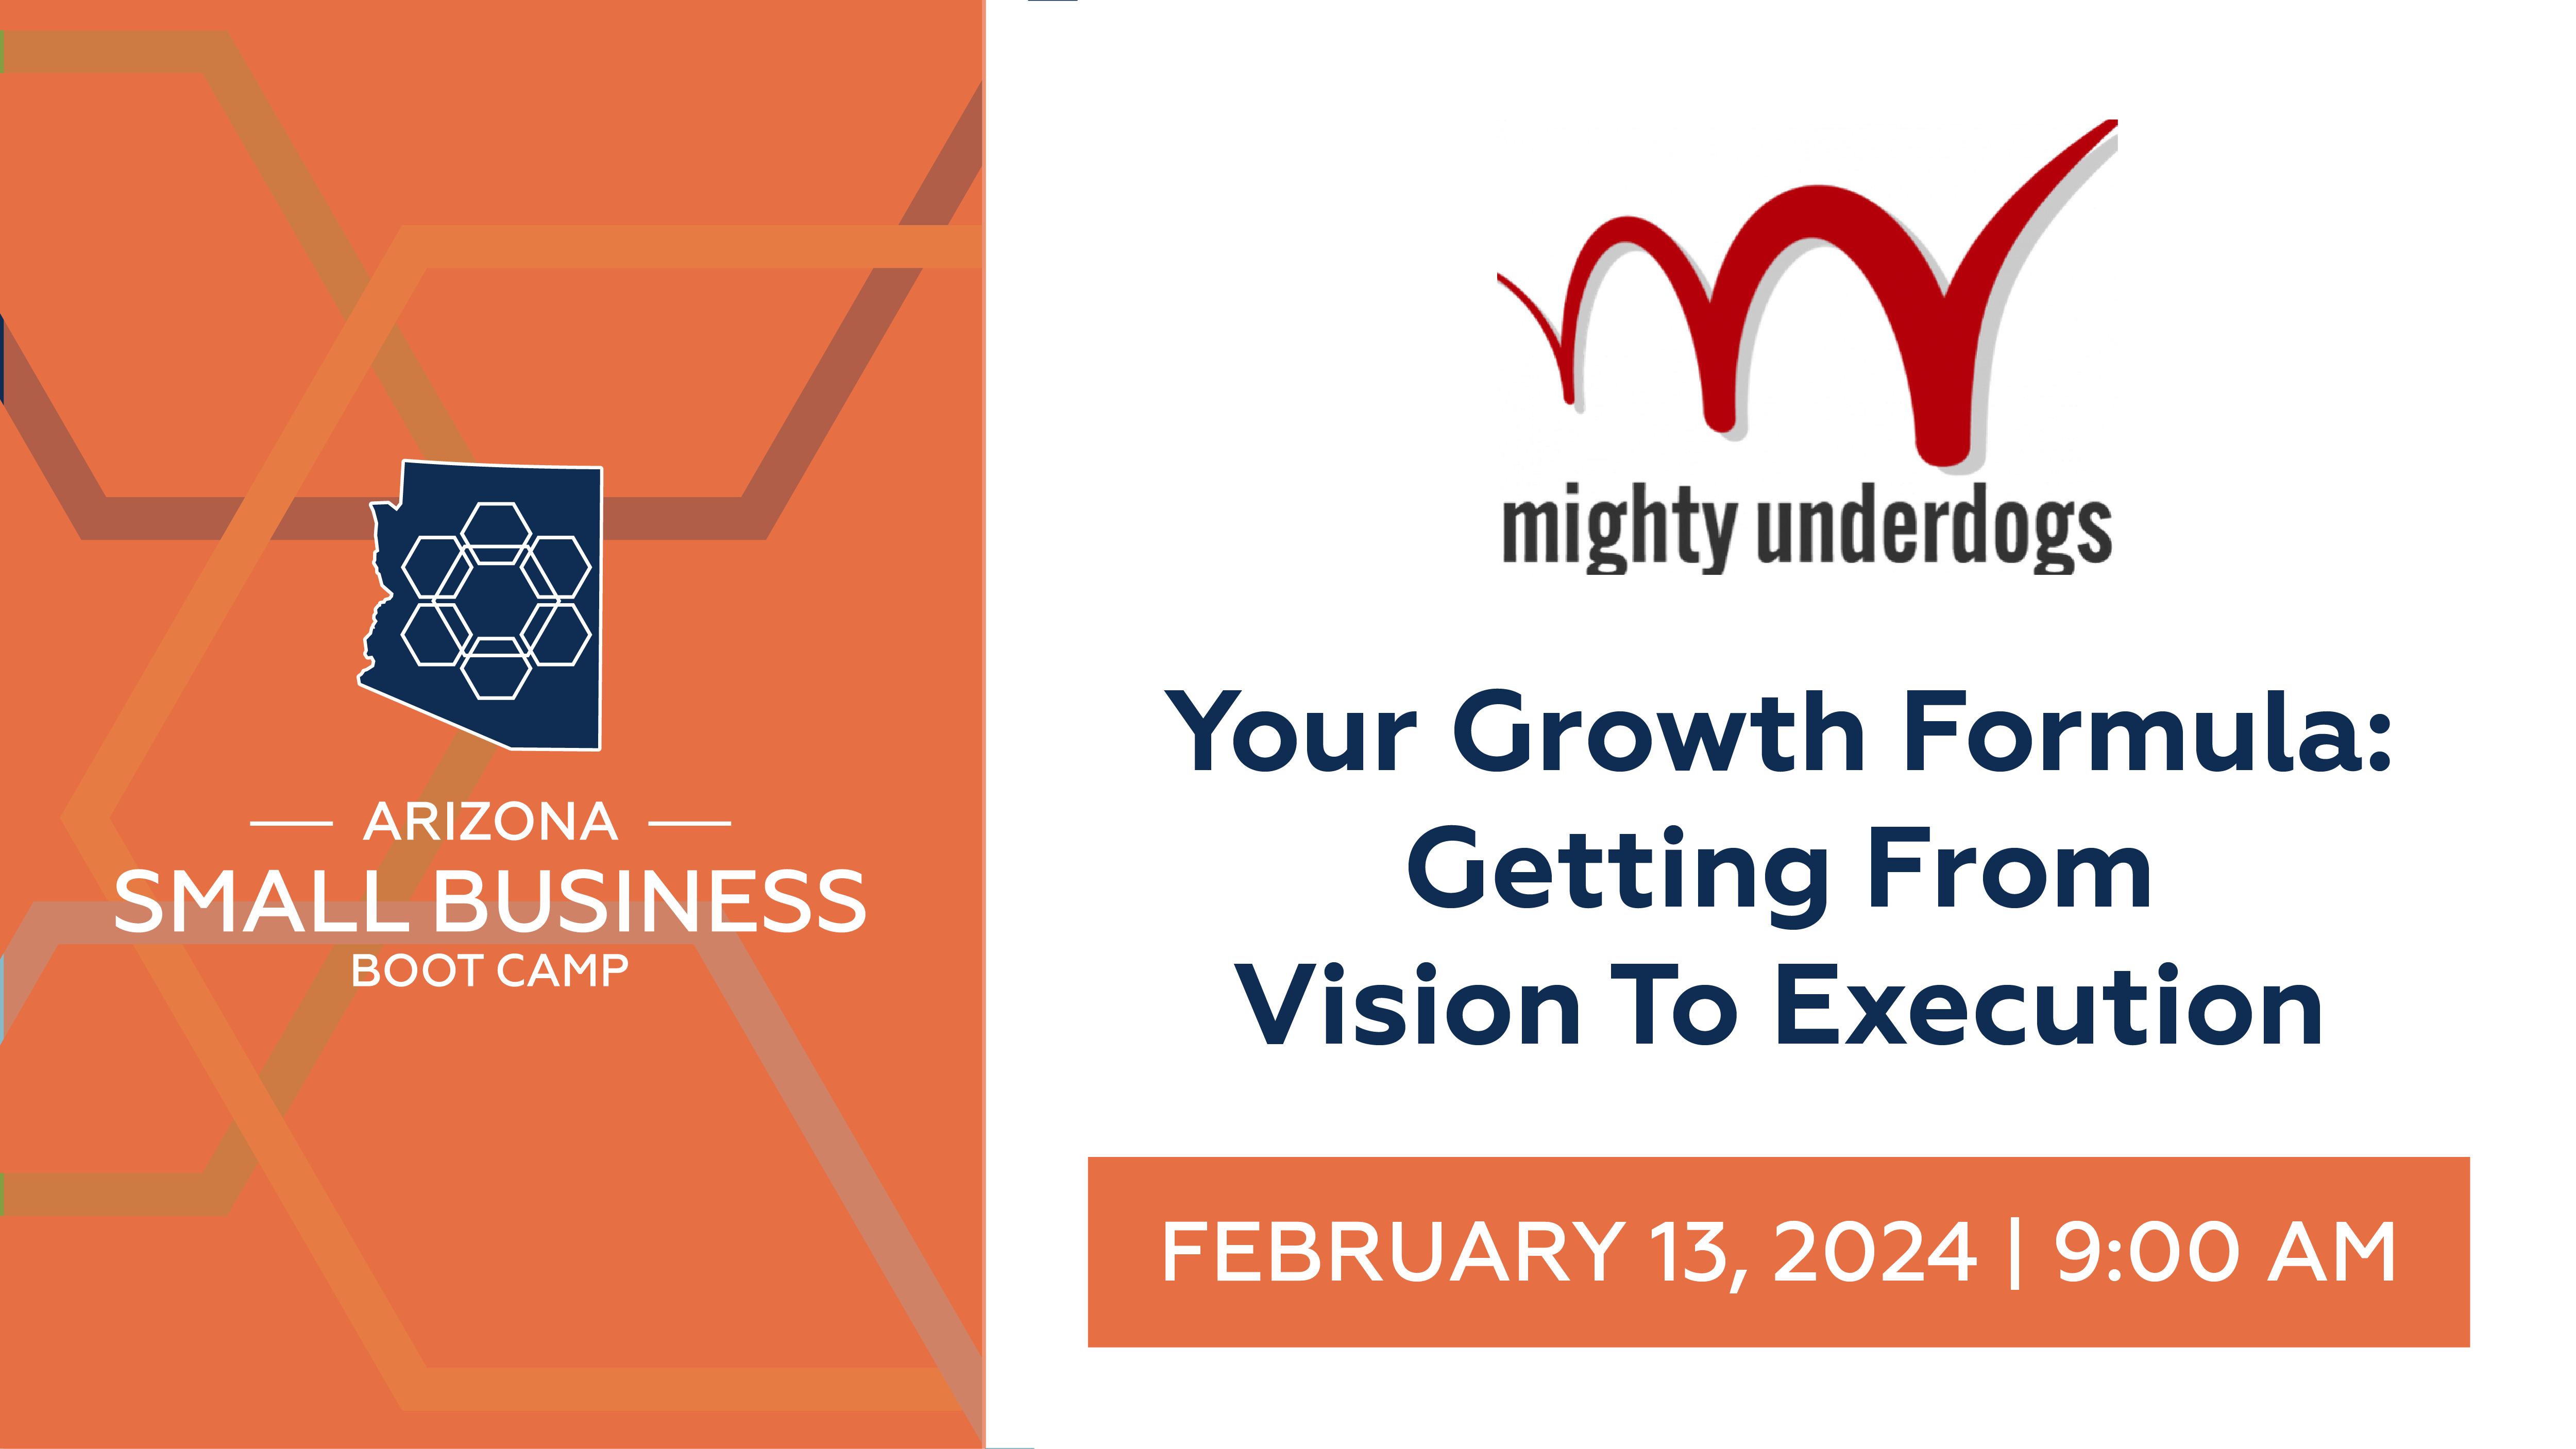 Your Growth Formula: Getting From Vision To Execution